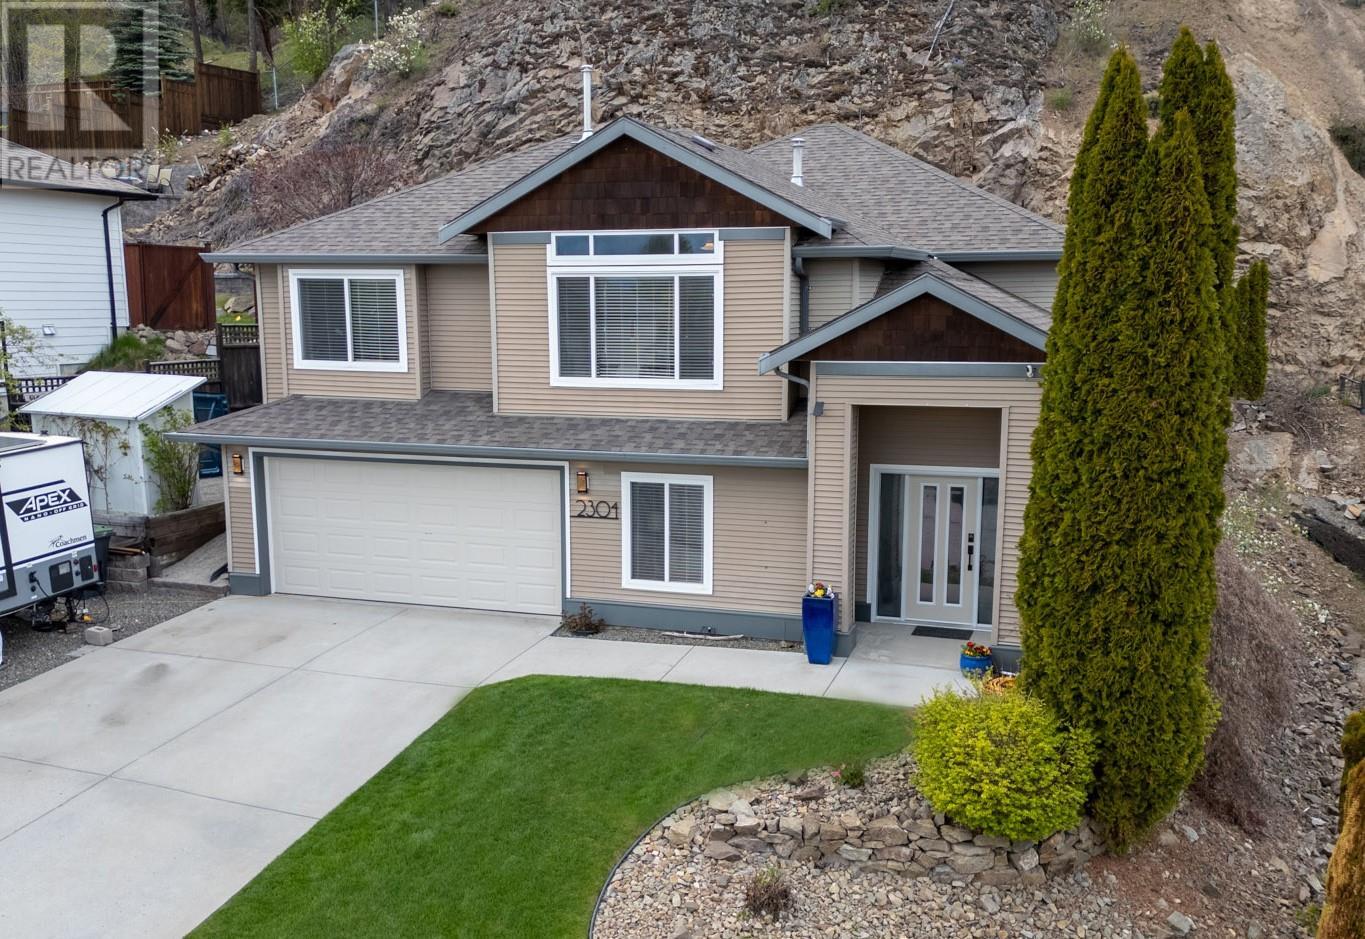 2304 Shannon Heights Place, West Kelowna, British Columbia  V4T 2V2 - Photo 1 - 10310720